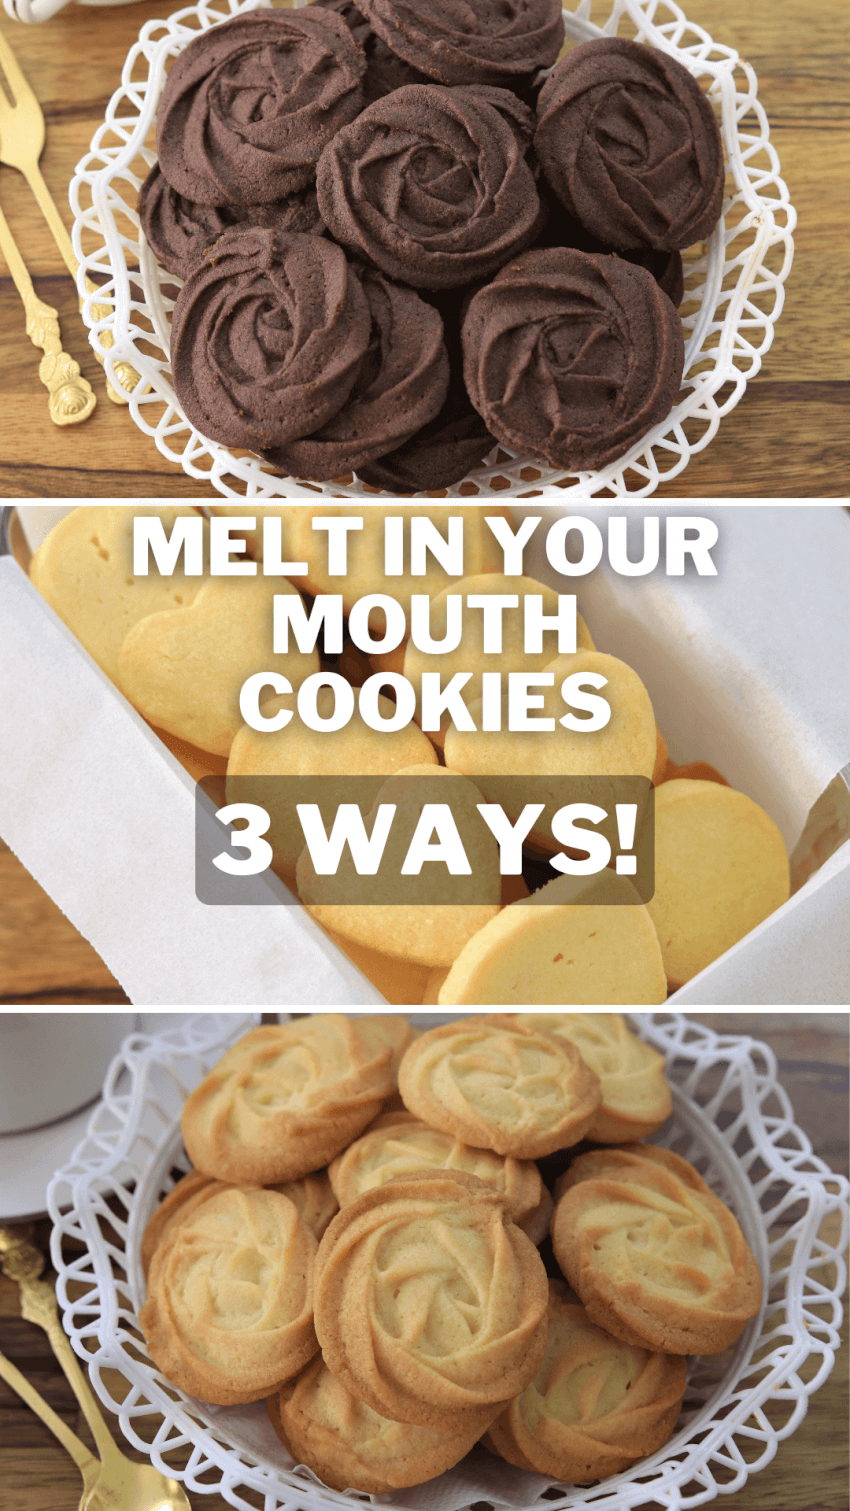 Melt in Your Mouth Cookies 